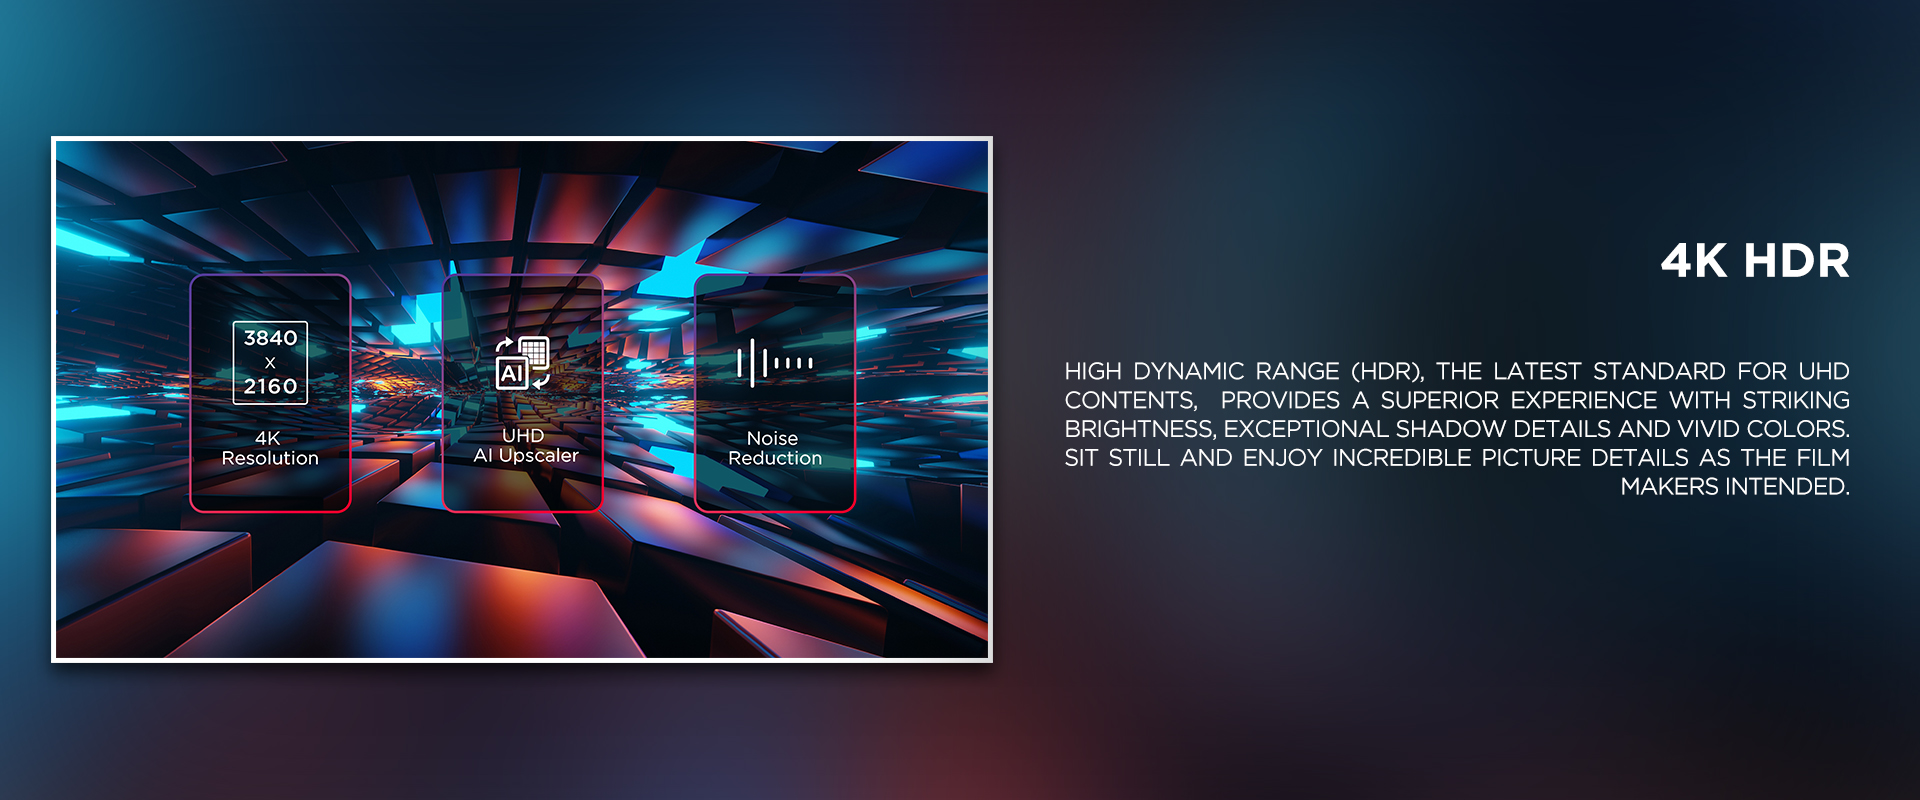 4K HDR-High Dynamic Range (HDR), the latest standard for UHD contents, provides a superior experience with striking brightness, exceptional shadow details and vivid colors. Sit still and enjoy incredible picture details as the film makers intended.